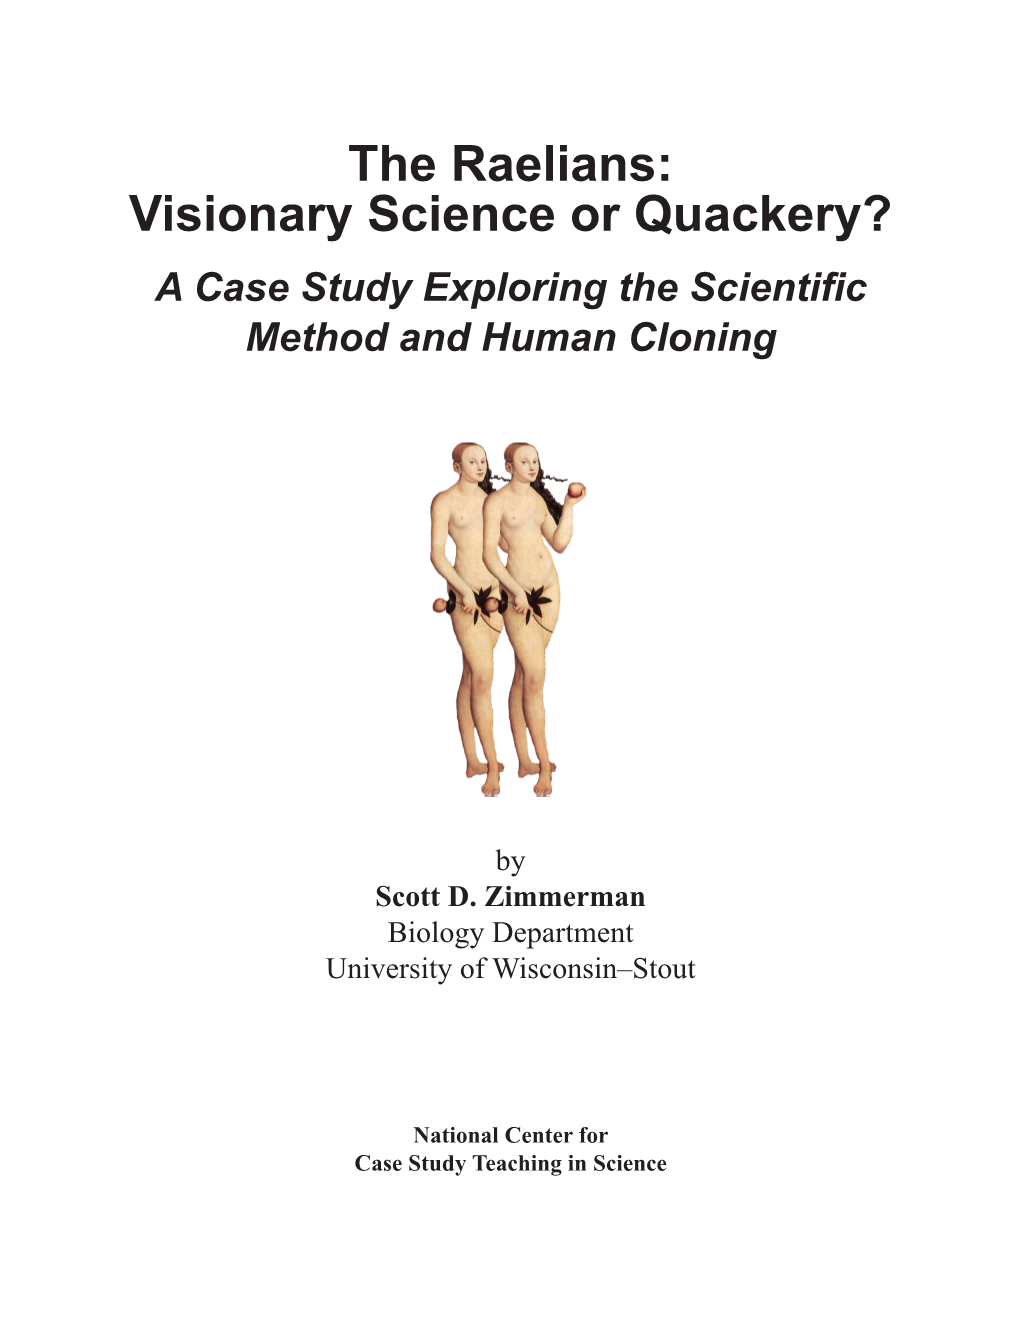 The Raelians: Visionary Science Or Quackery? a Case Study Exploring the Scientiﬁc Method and Human Cloning